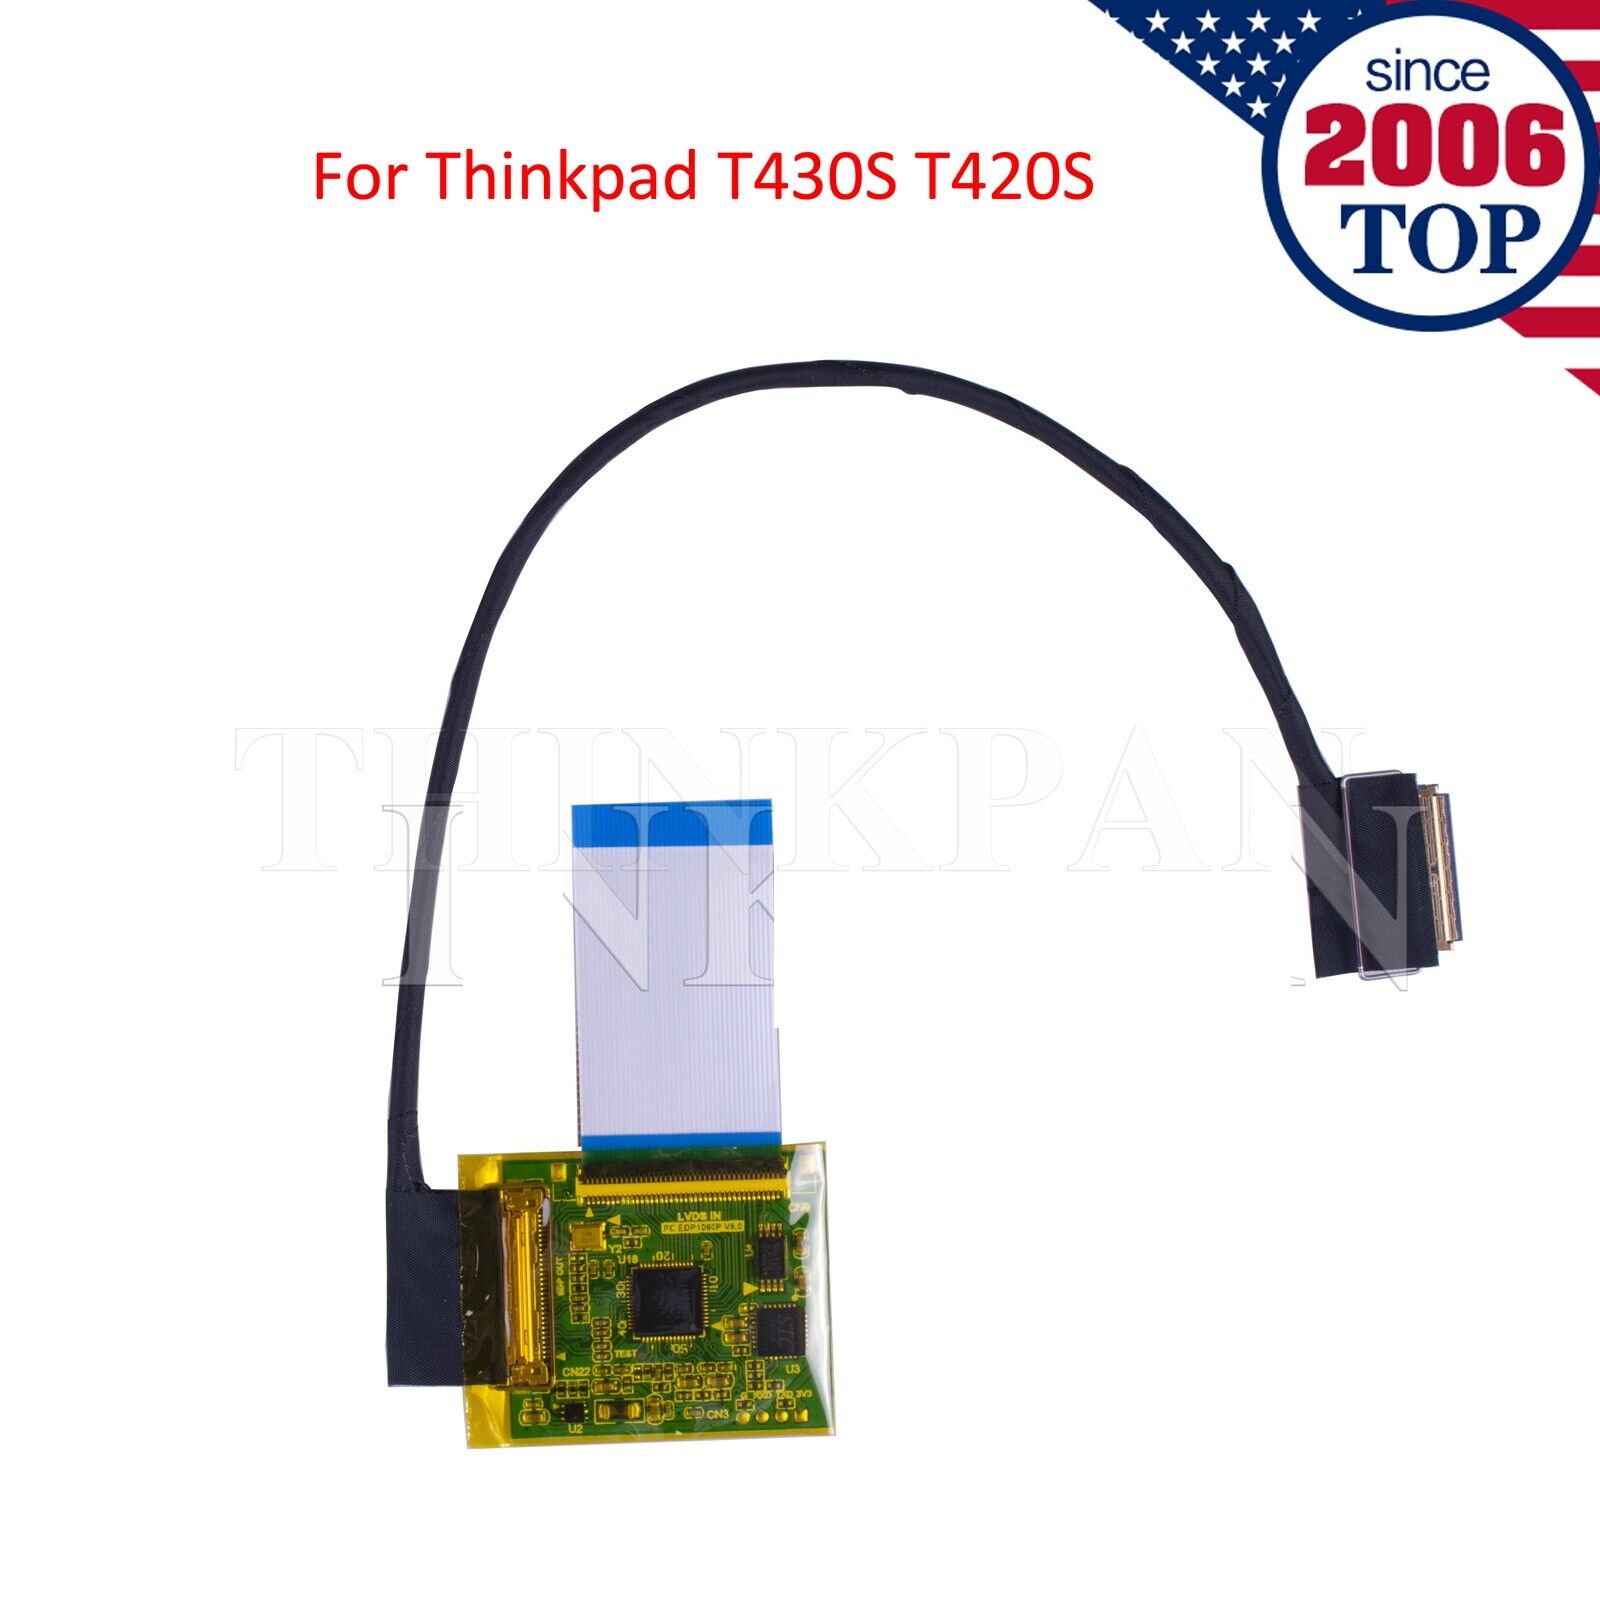 New IPS FHD Upgrade Kit 1080P Screen Kit for thinkpad T430S T420S LCD Controller